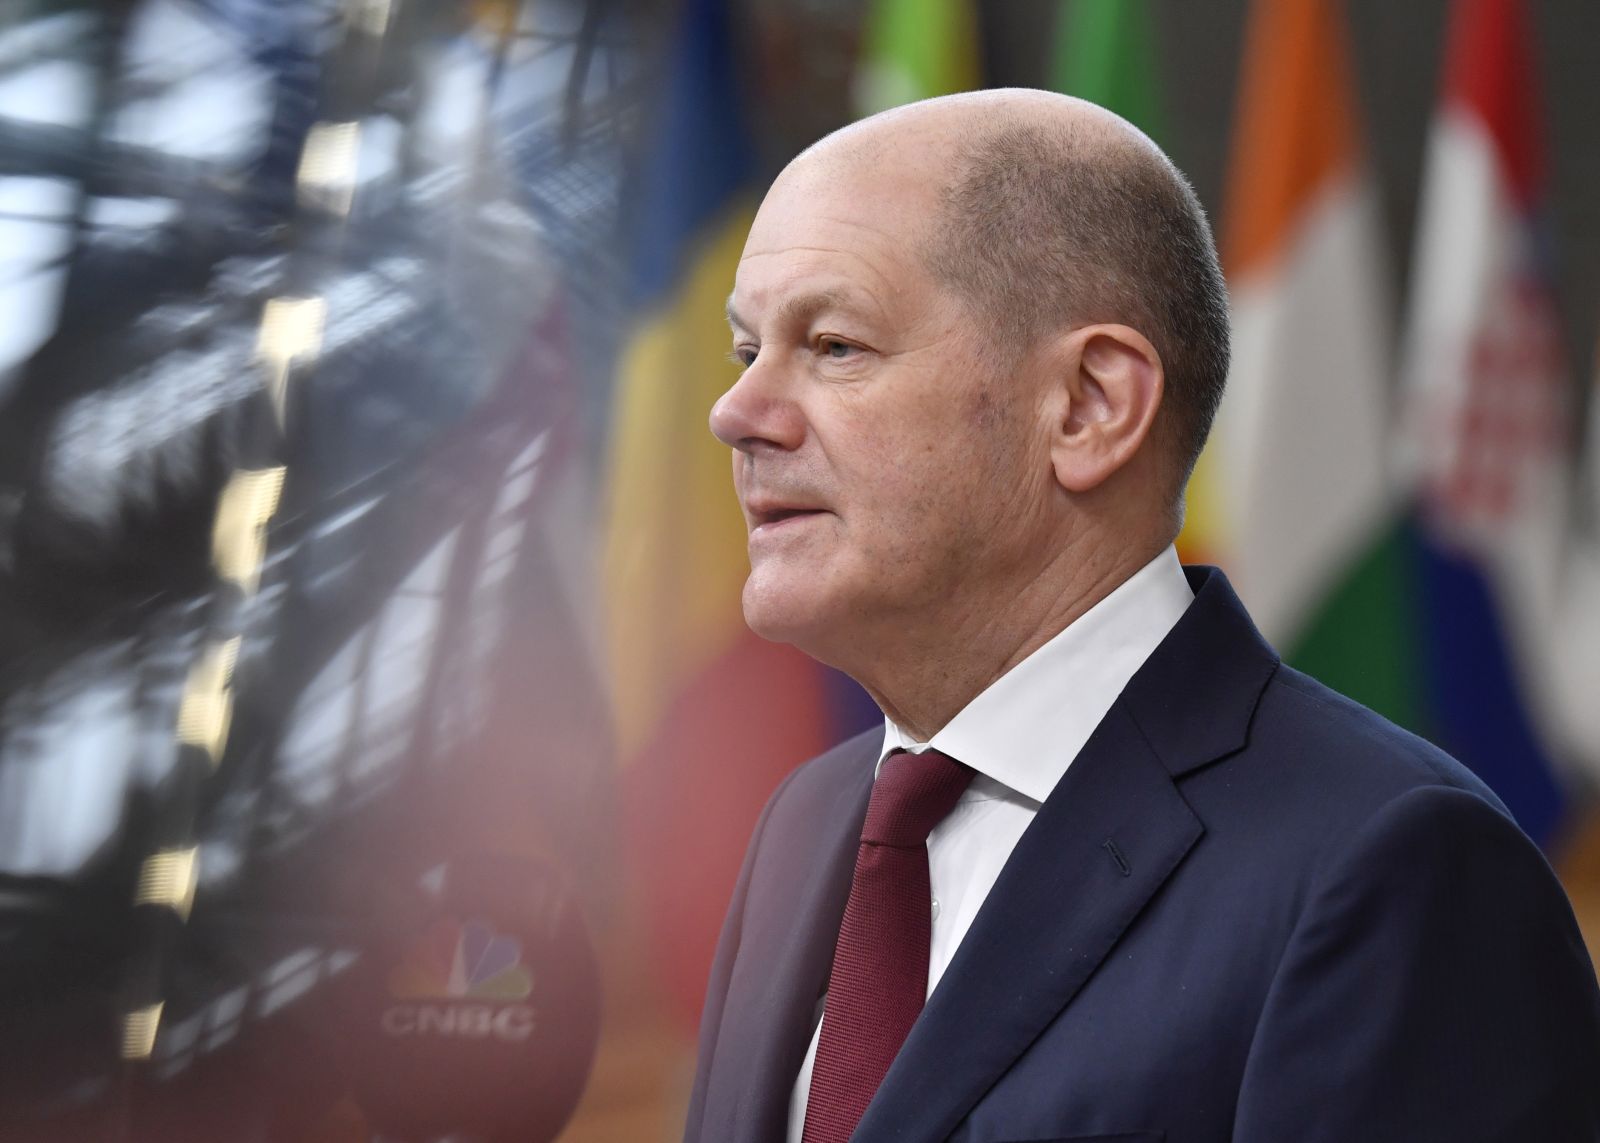 epa09766449 German Chancellor Olaf Scholz speaks with the media as he arrives for an European Union-African Union summit at the European Council building in Brussels, Belgium, 17 February 2022. European Union leaders meet with their African counterparts during a two-day summit in Brussels. The EU wants to re-engage with African nations and counter the growing influence from China and Russia across the continent.  EPA/GEERT VANDEN WIJNGAERT / POOL